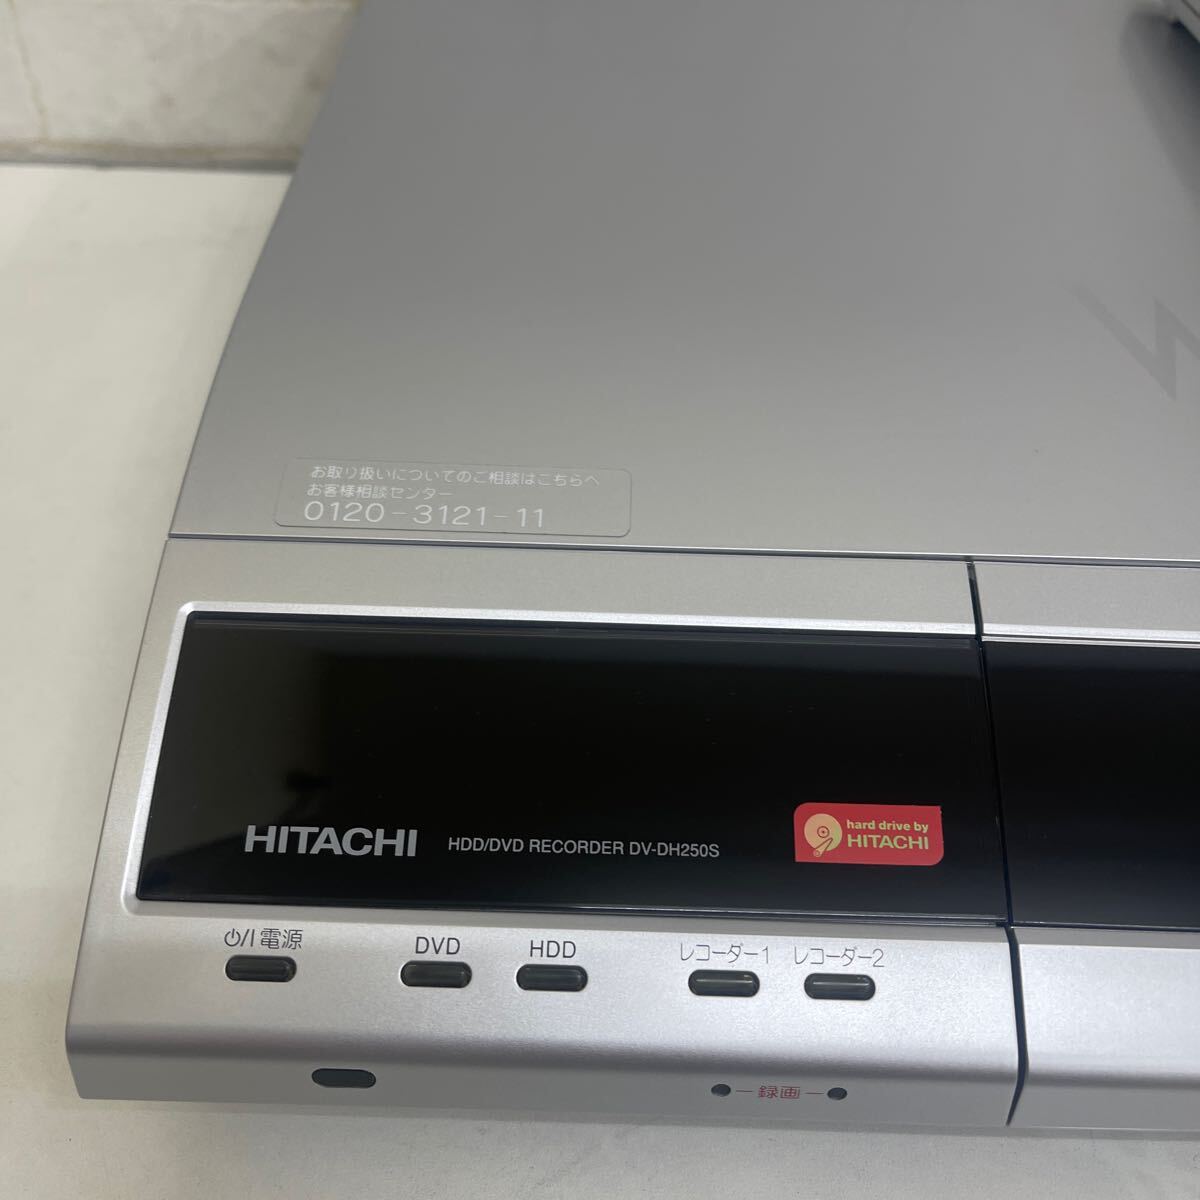 Y318. 36. HITACHI DV-DH250S Hitachi DVD/HDD recorder 2007 year made simple operation check settled. remote control power supply HDMI unused attaching beautiful goods 